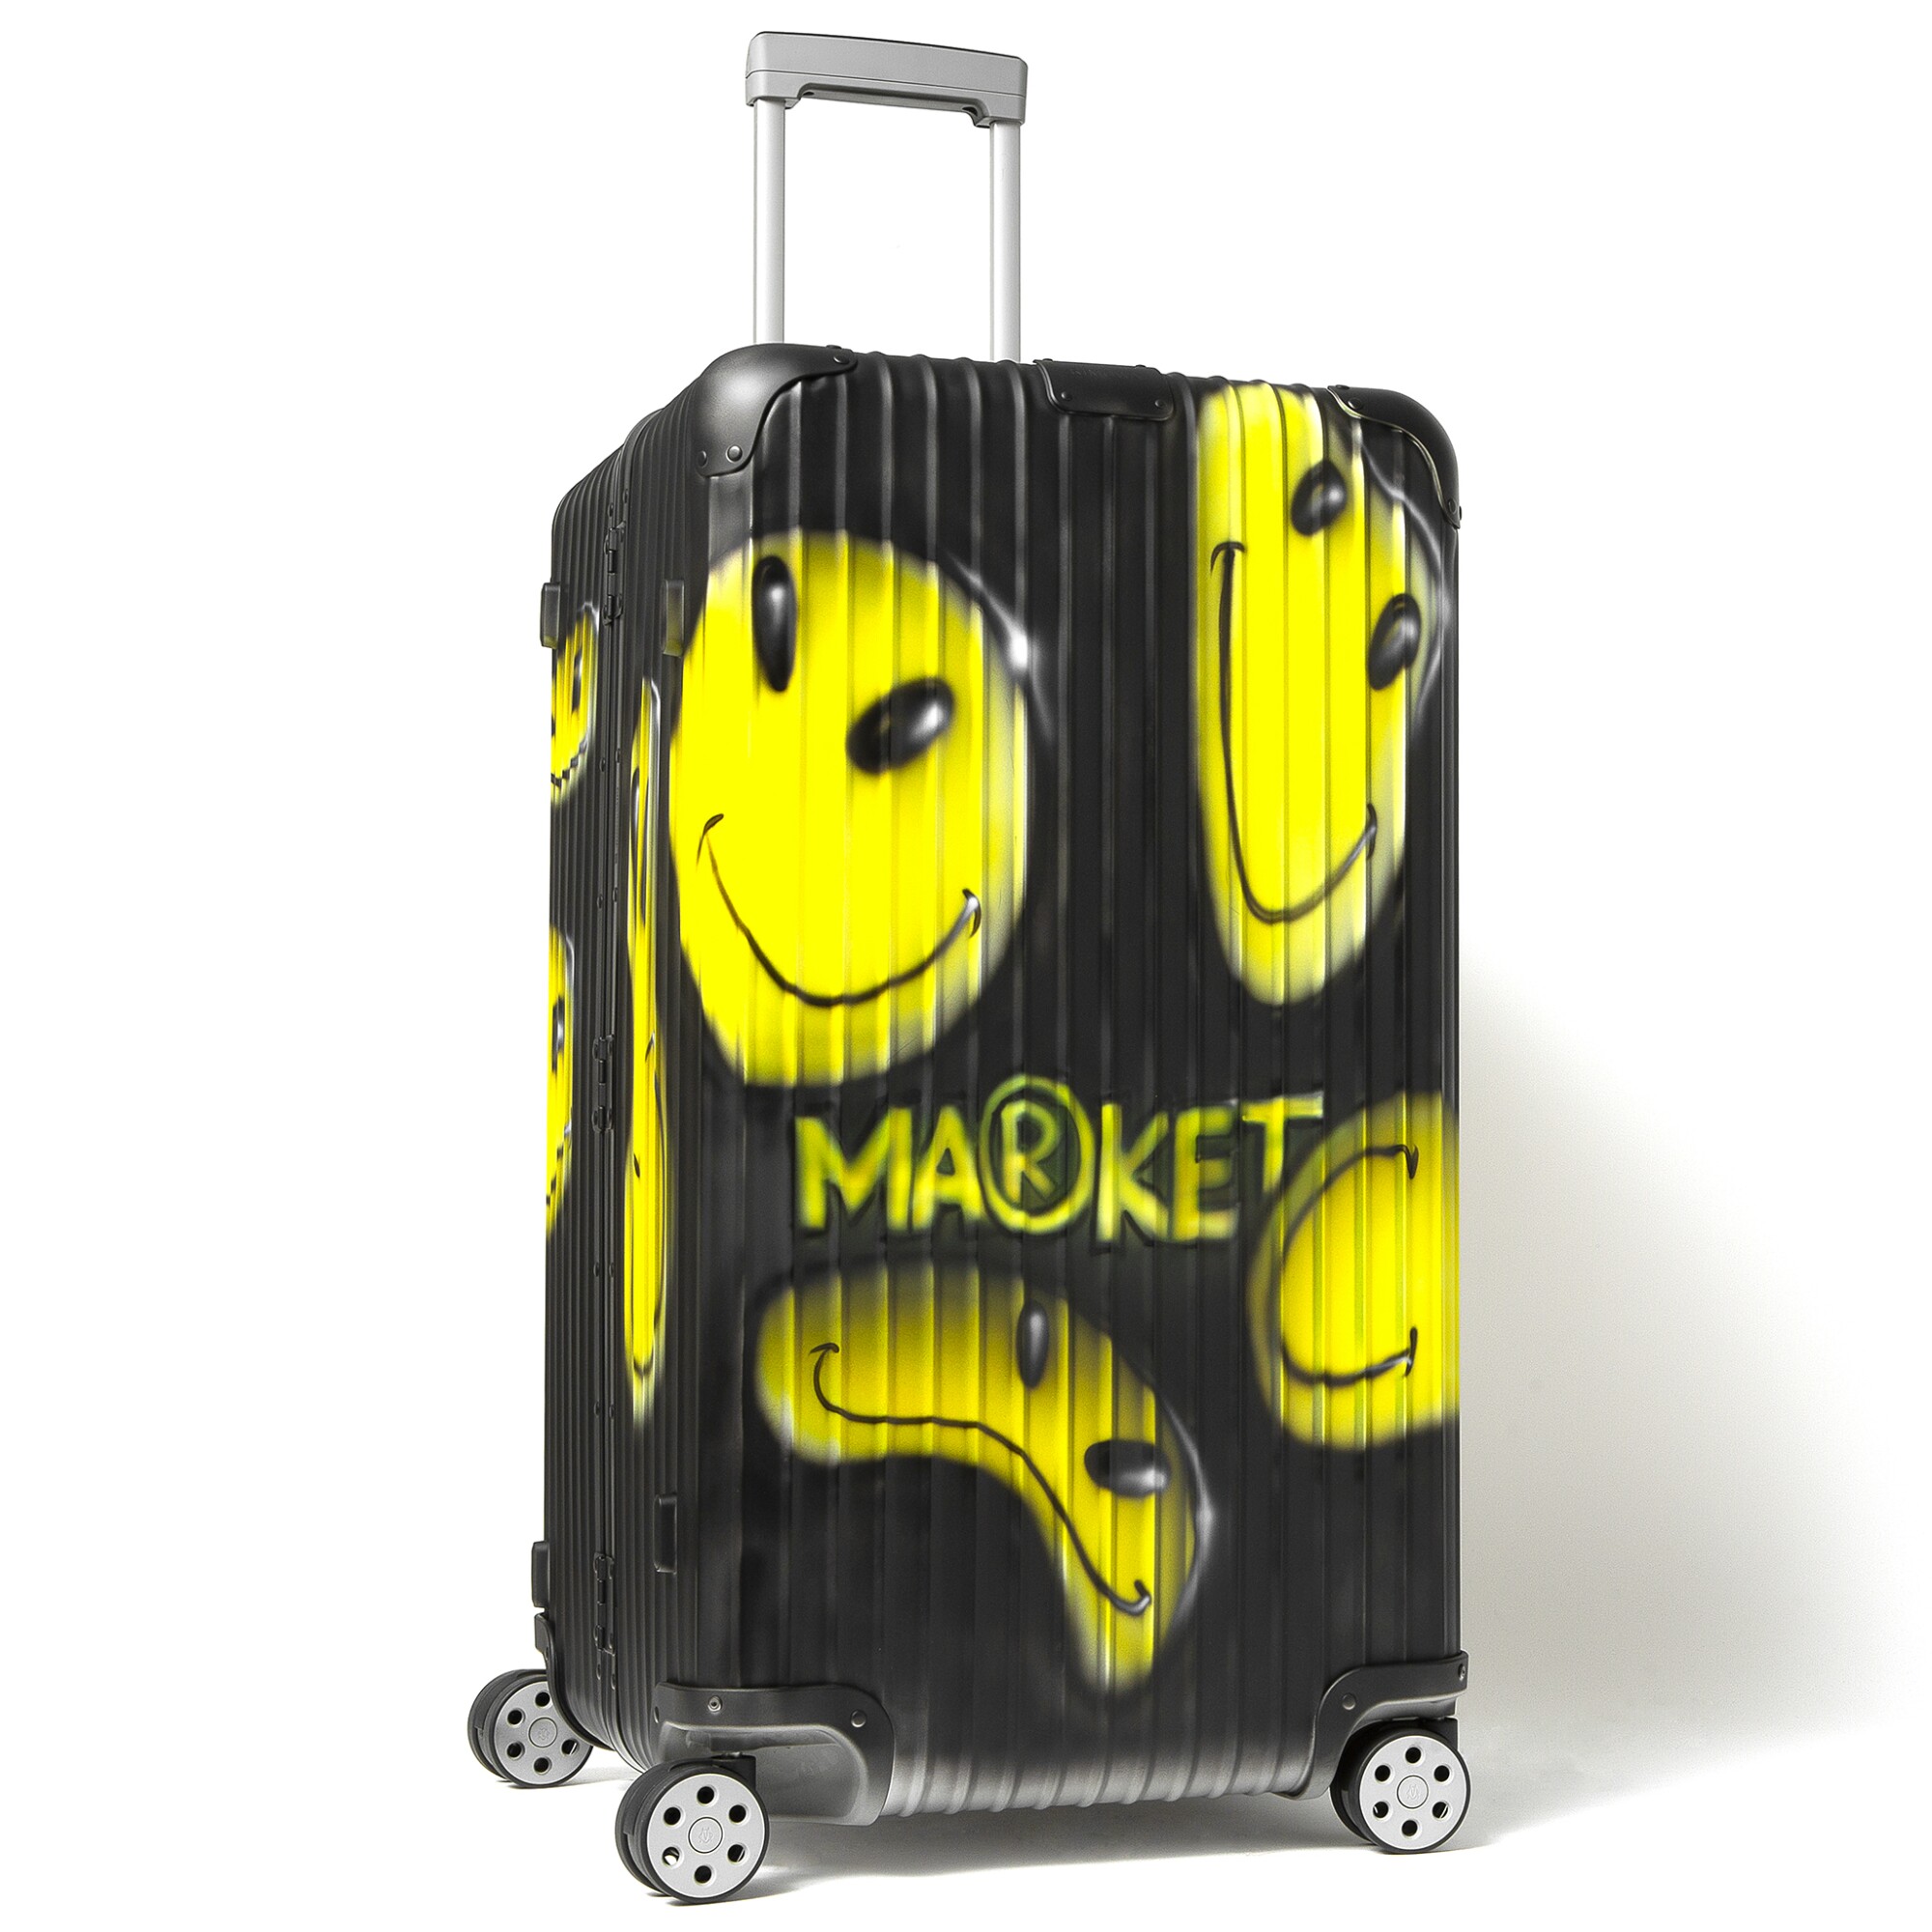 A black rolling suitcase with yellow smiley faces and the word "Market" on it